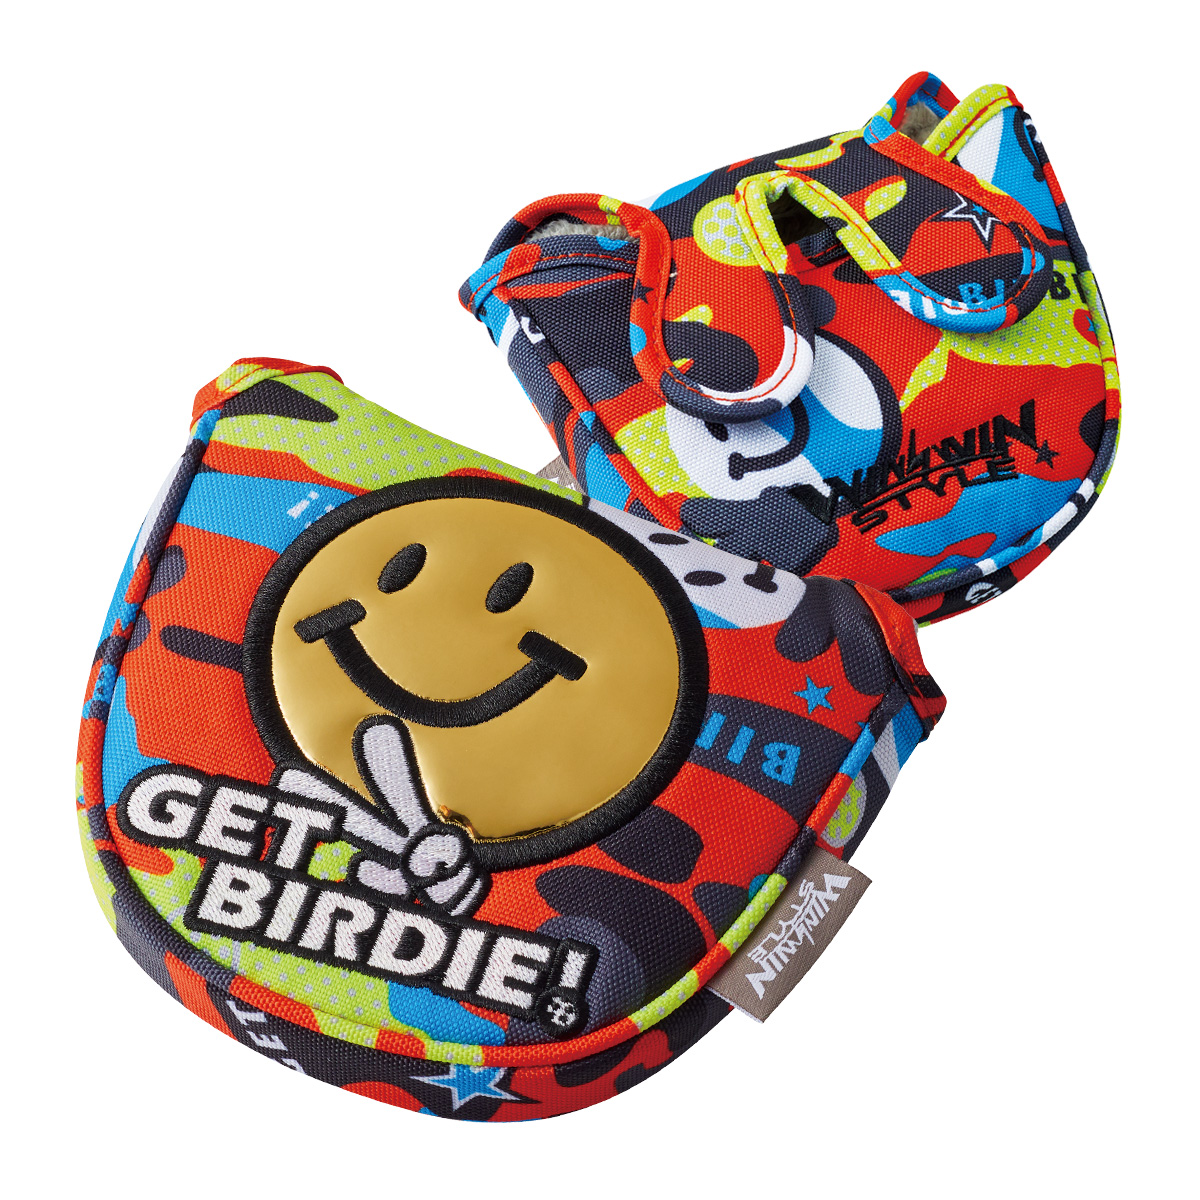 GET BIRDIE!CAMO PUTTER COVER マレットタイプ